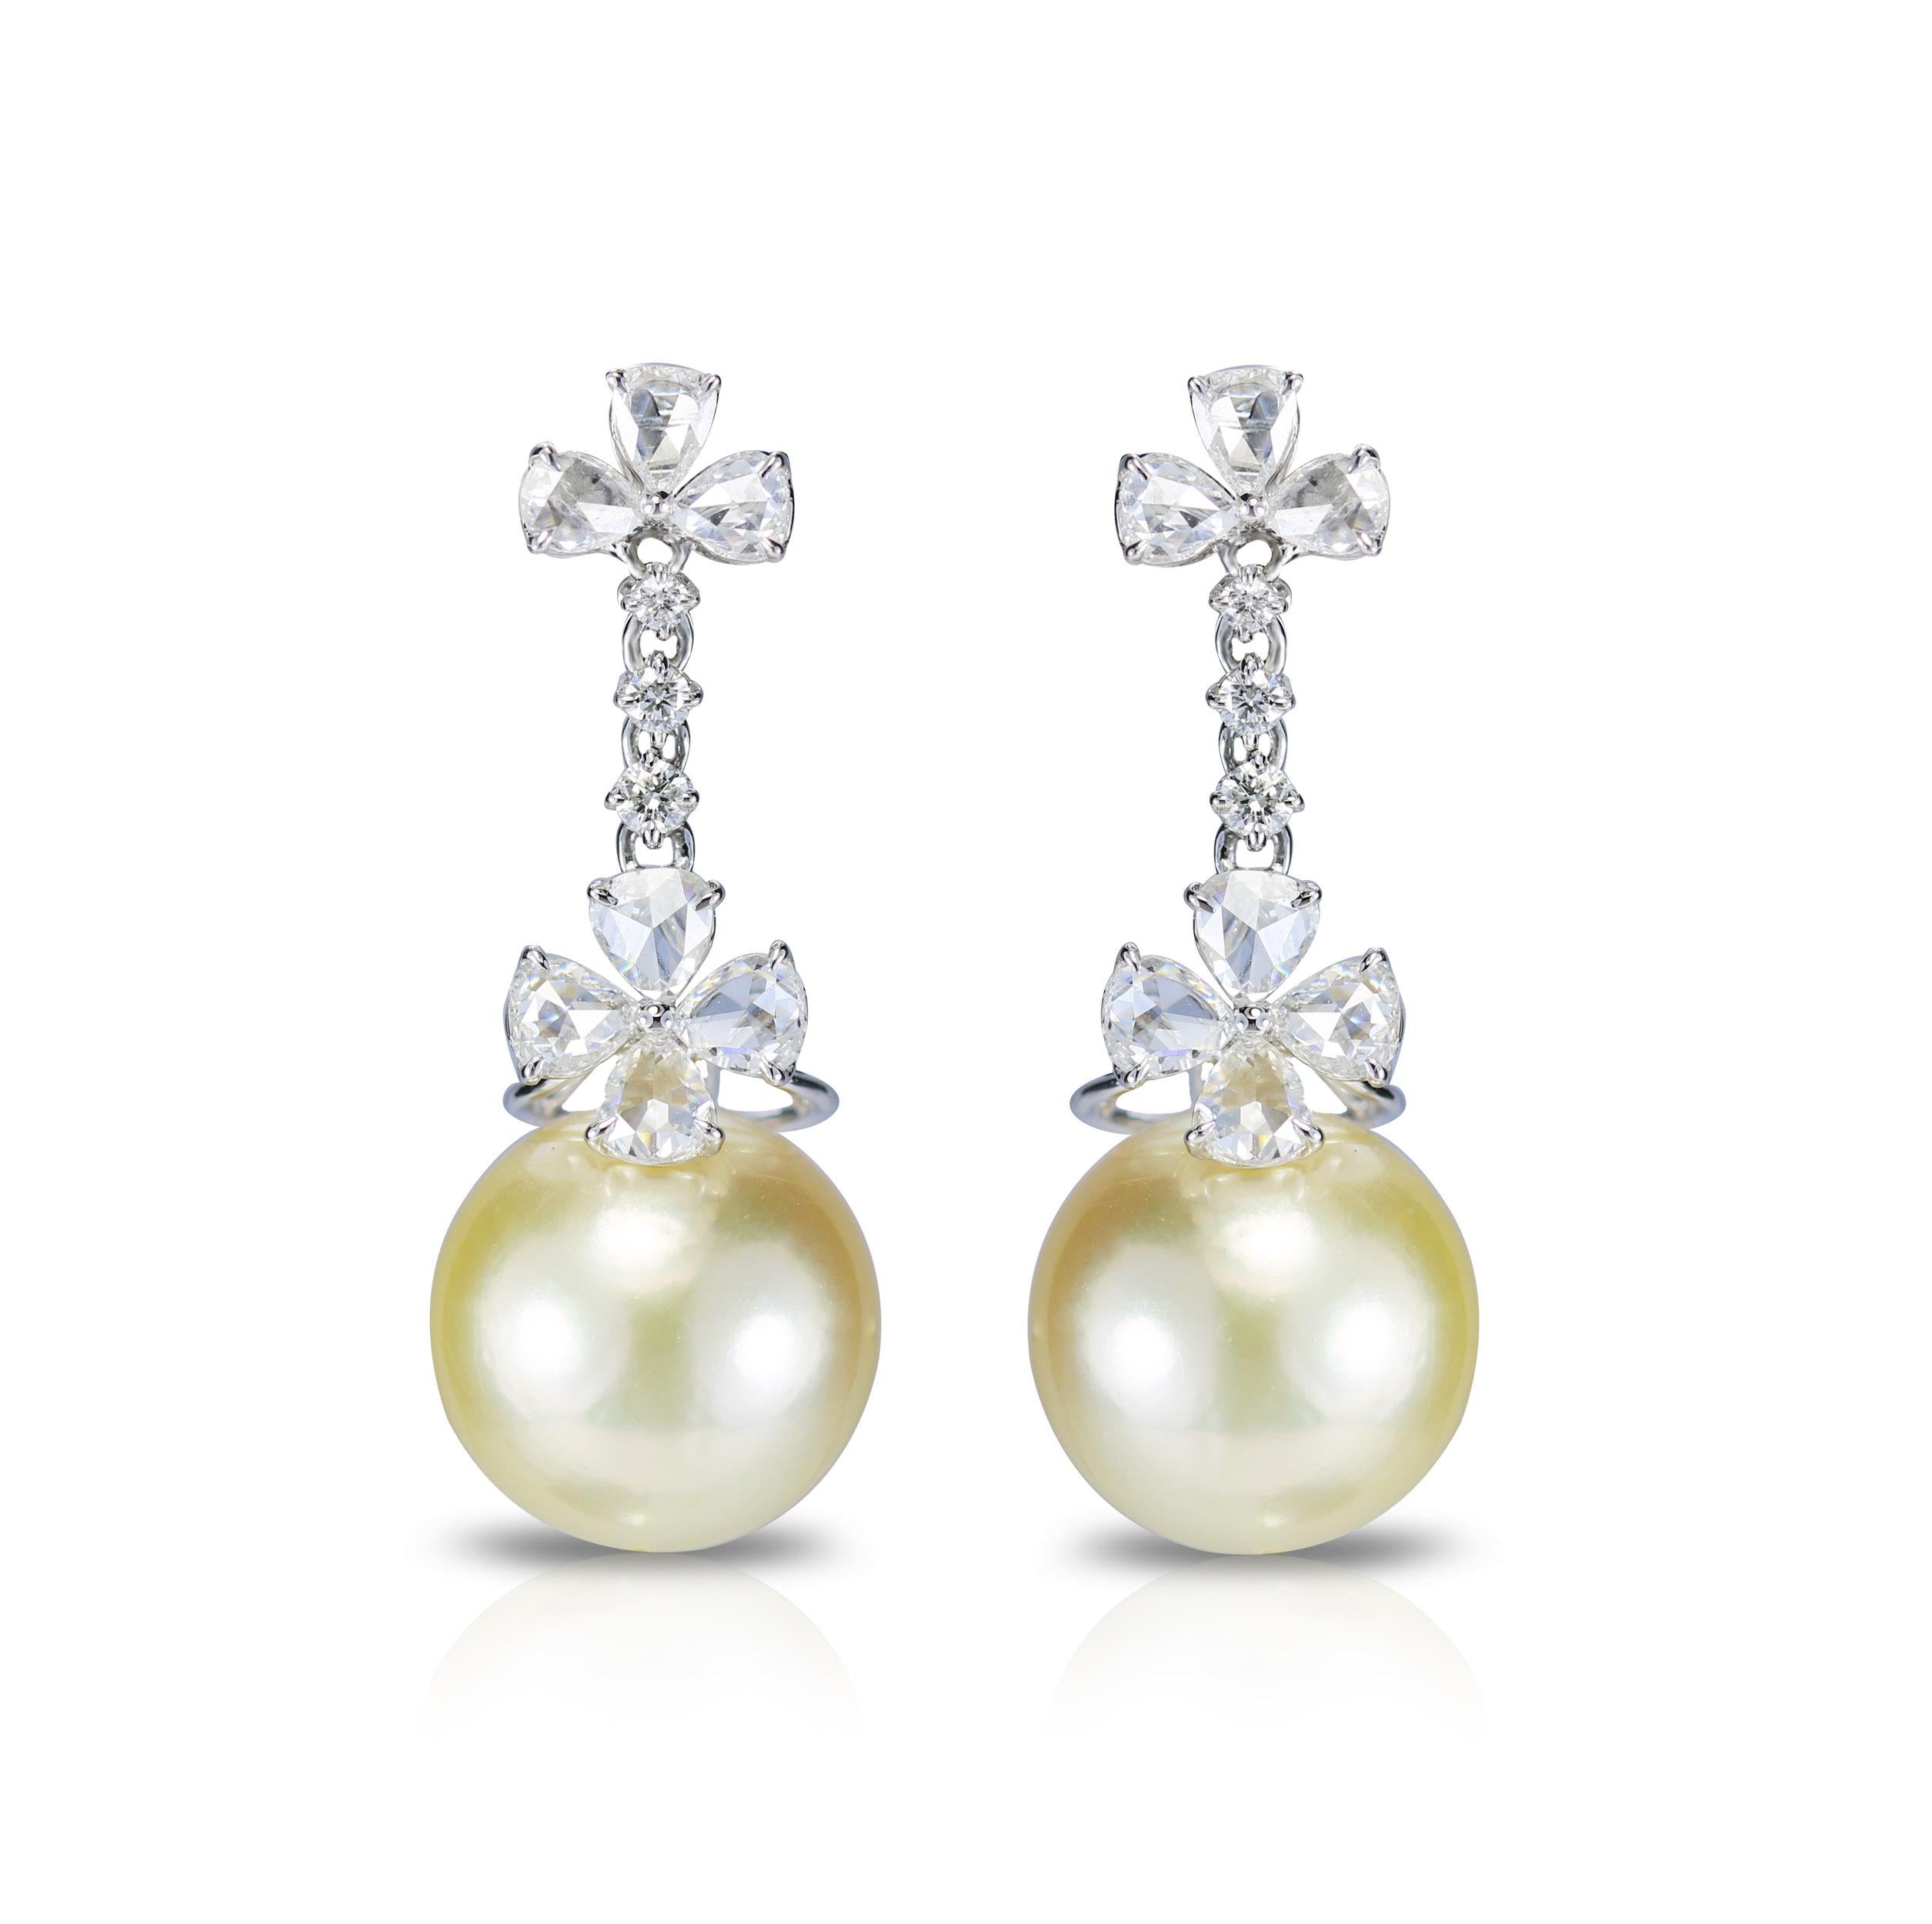 Studio Rêves Rose Cut Diamond and Pearl Earrings in 18 Karat White Gold In New Condition For Sale In Mumbai, Maharashtra